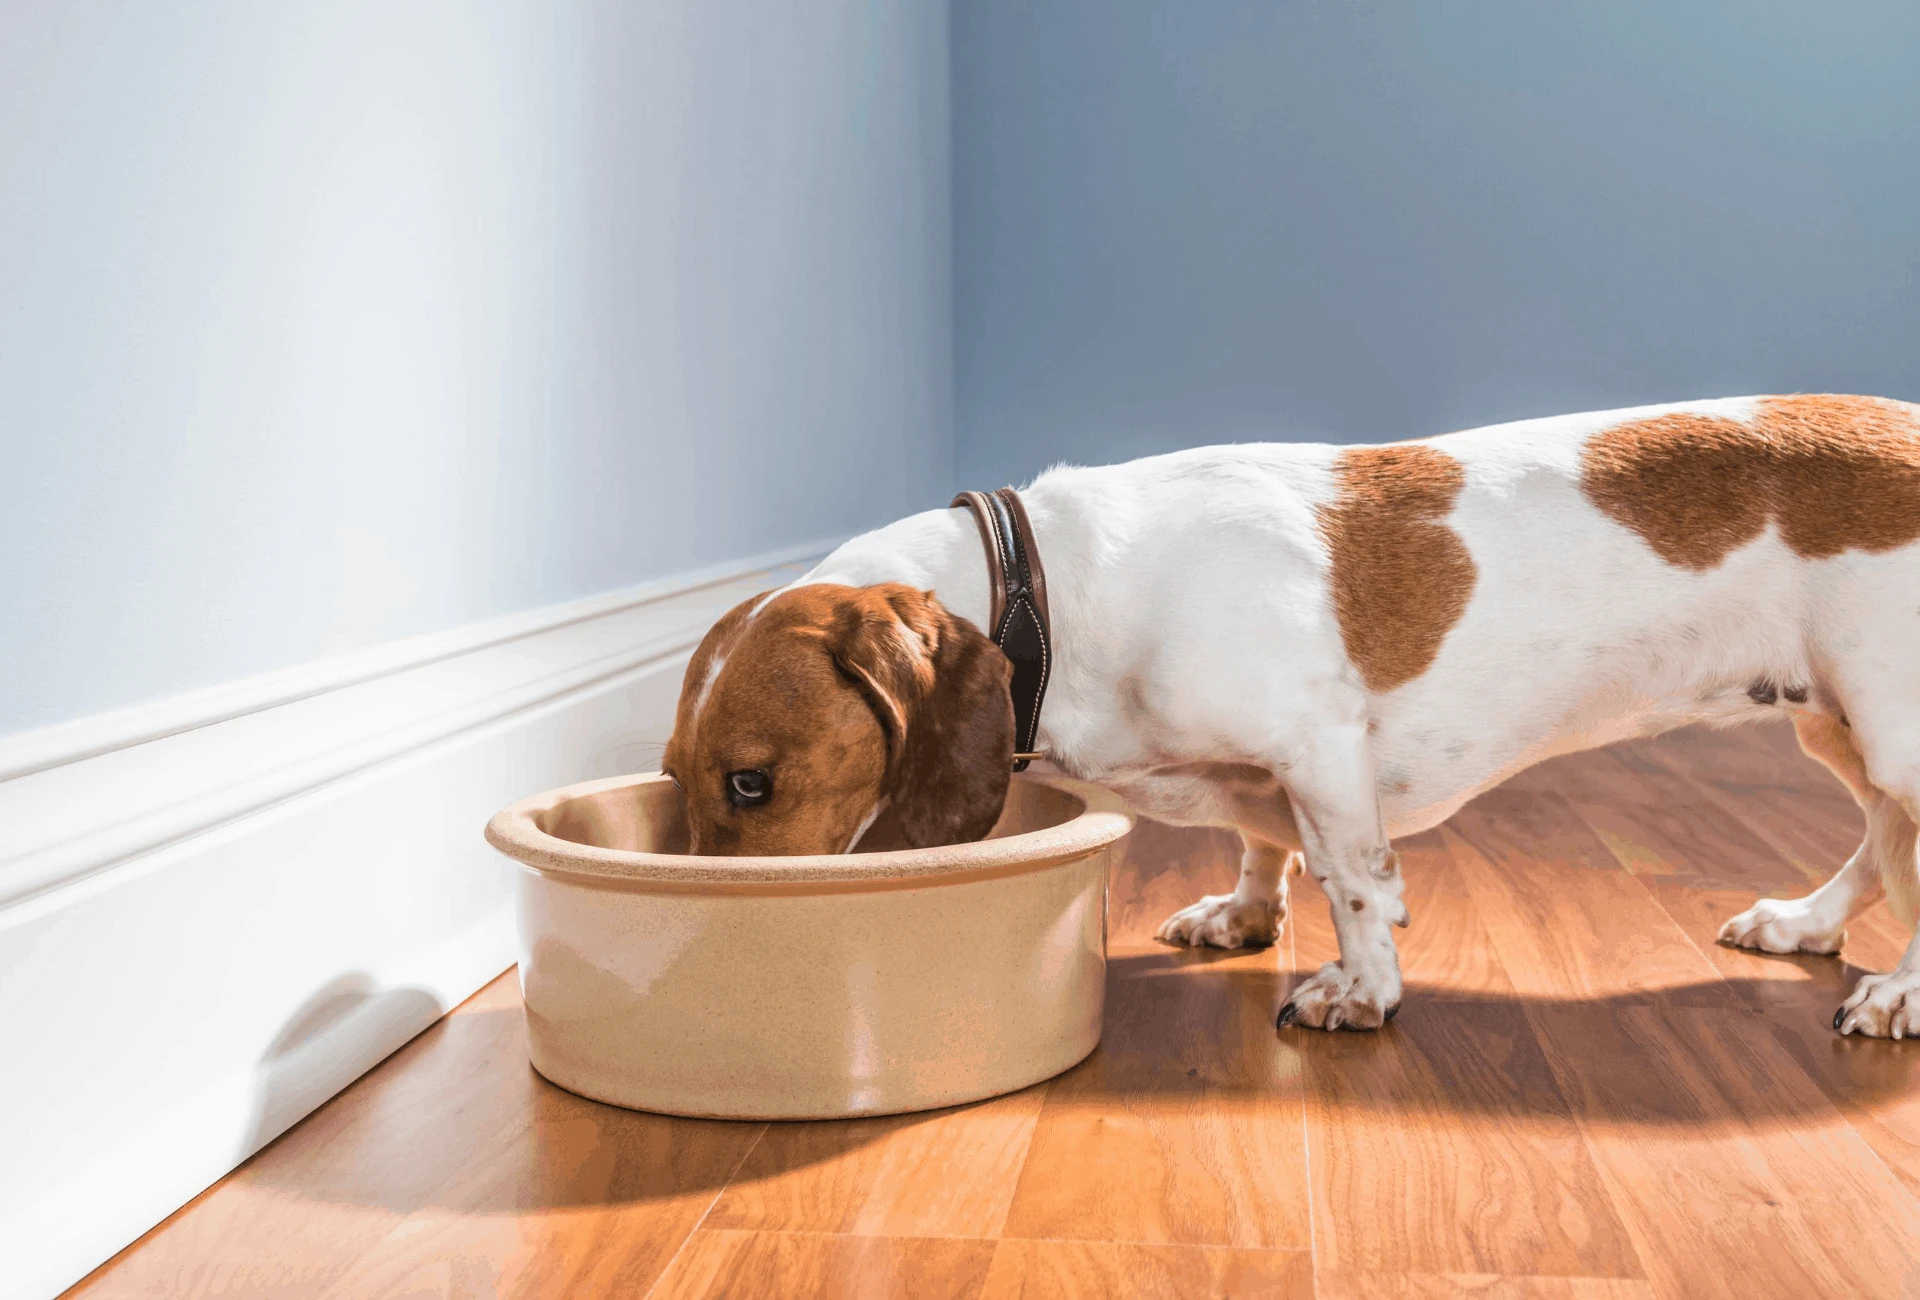 Dachshund eating out of a bowl